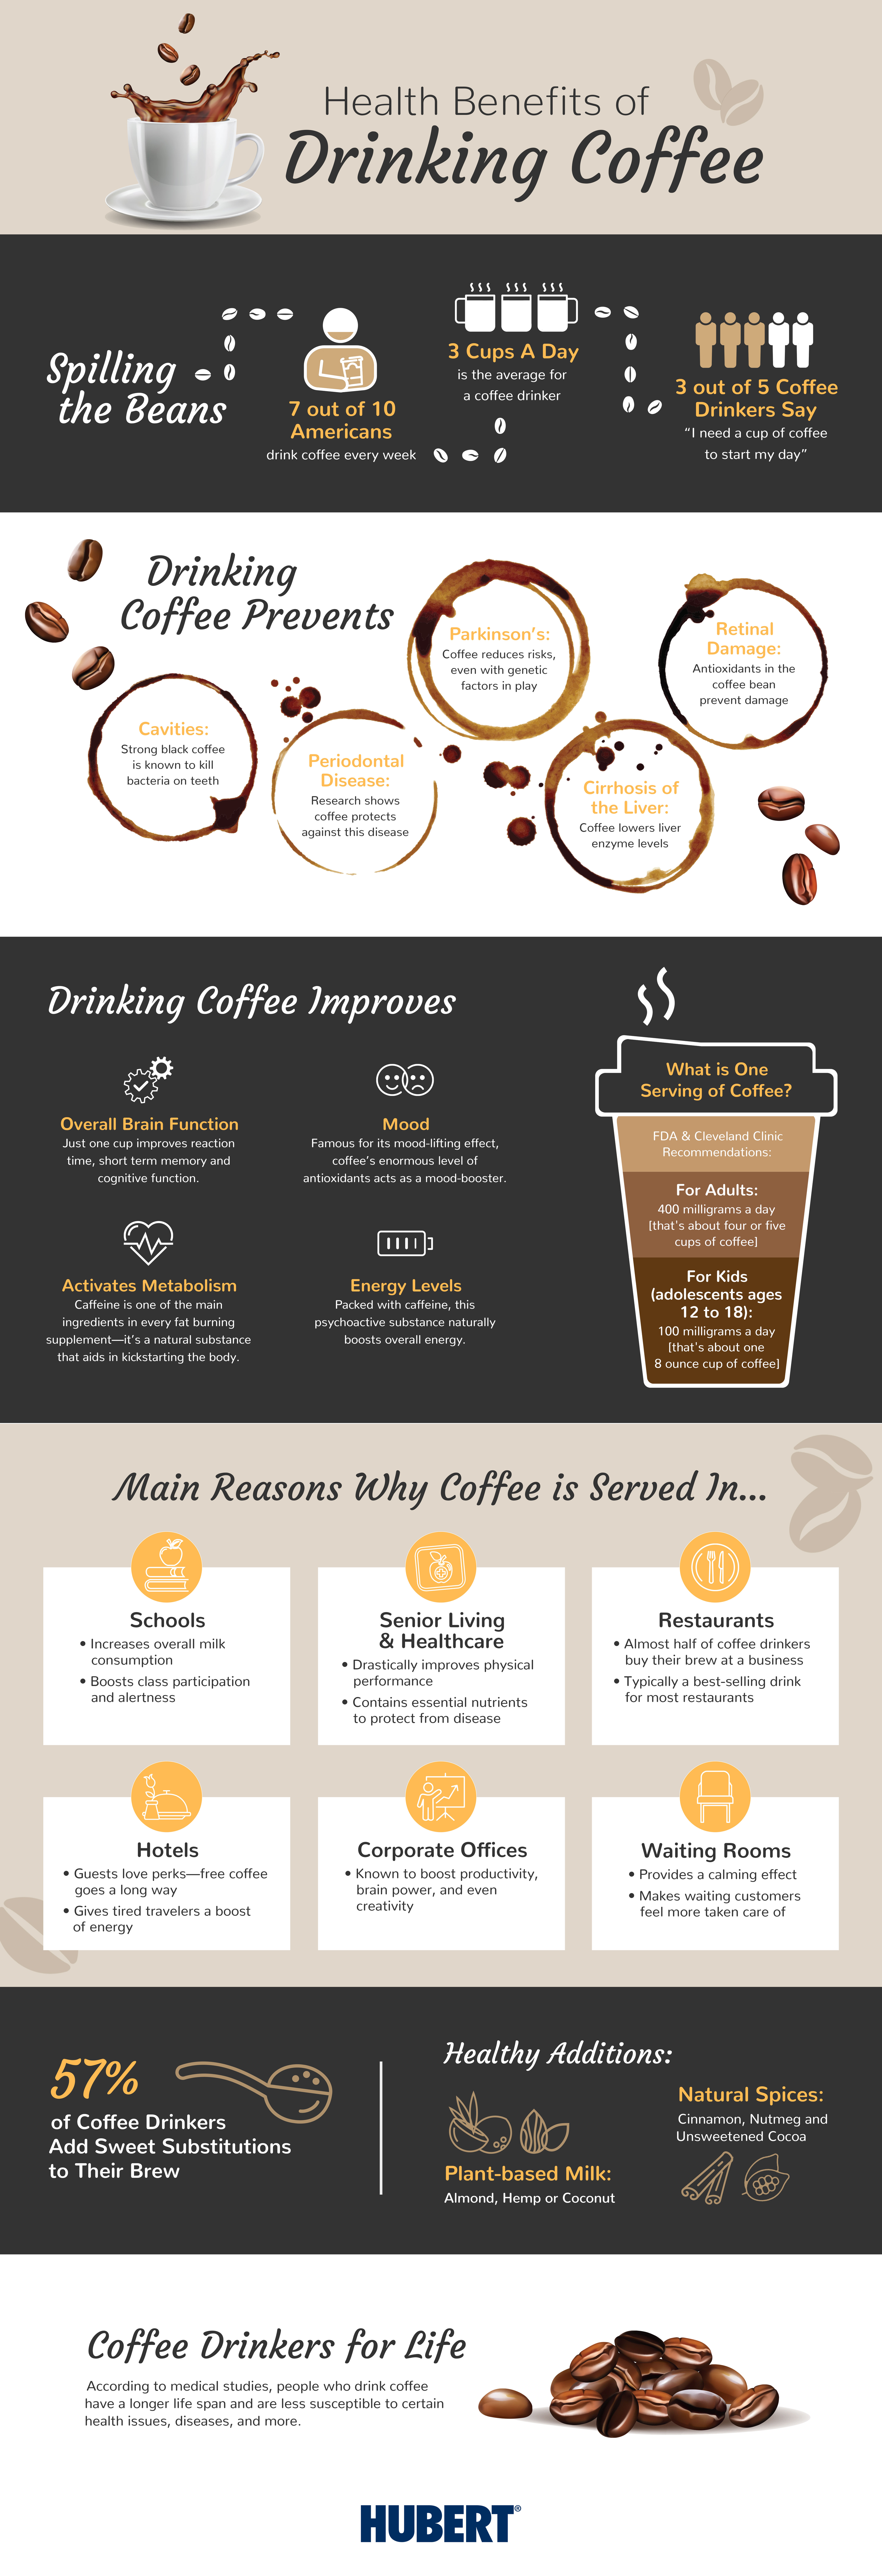 Health Benefits of Drinking Coffee, full text below